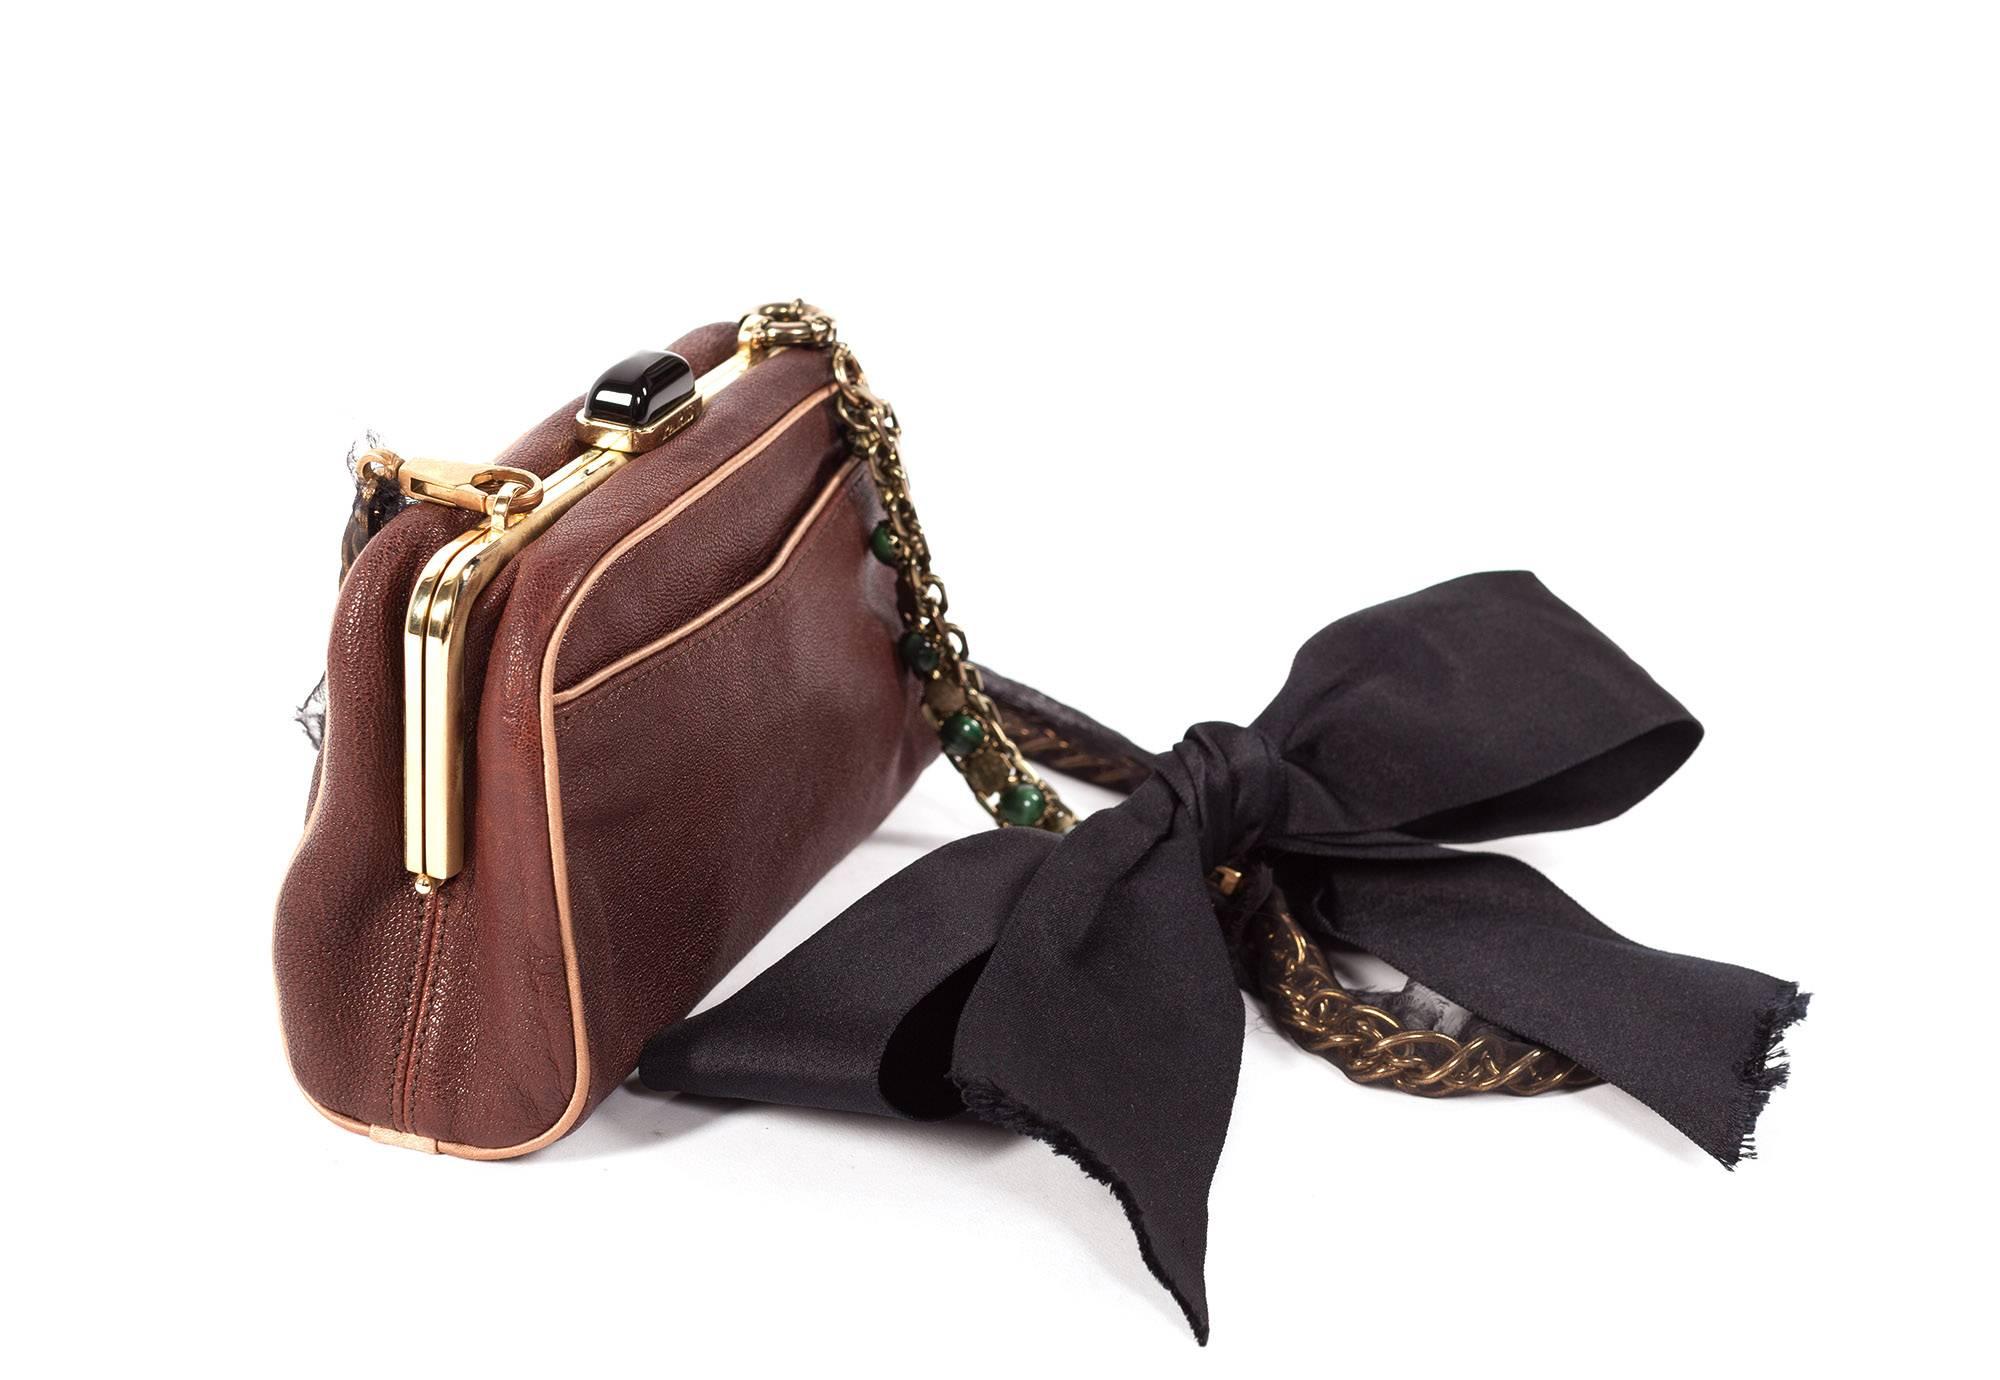 Purse comes in chocolate brown leather, tan leather trim around edges, small outside pocket, gold metal hardware with black clasp, inside is lined in satin, chain is detachable, and in gold with silk mesh overlay, large satin bow with coin logoed